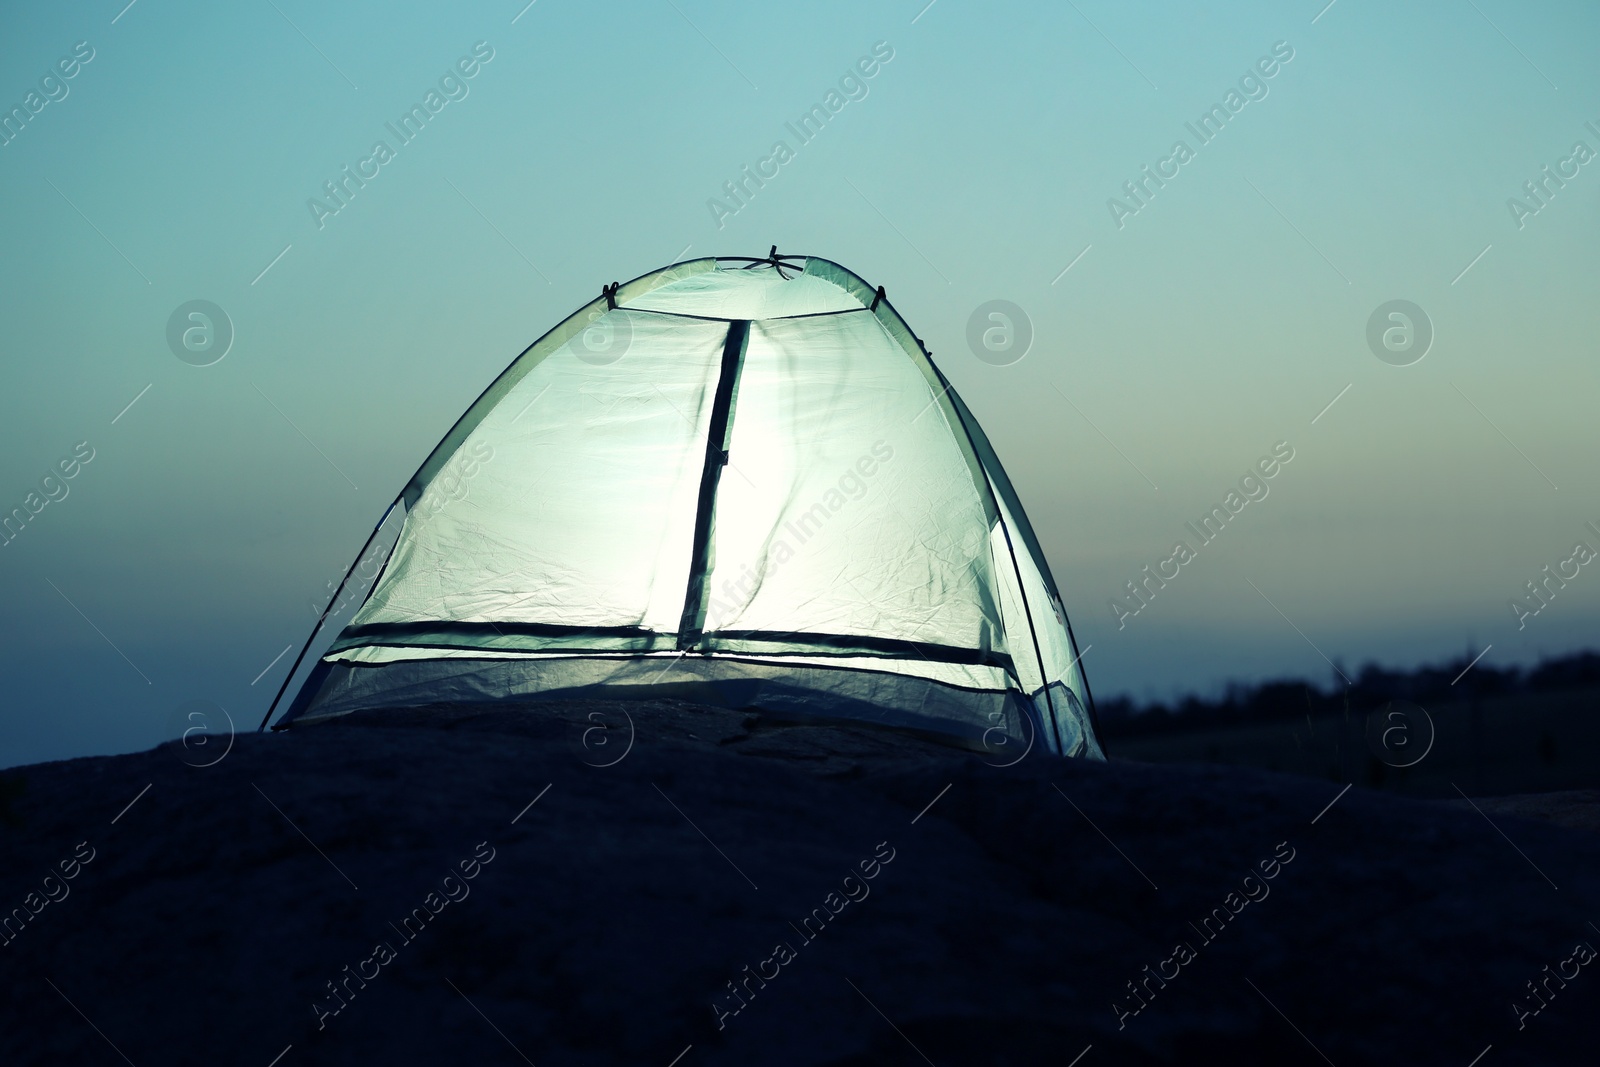 Photo of Small camping tent glowing in twilight outdoors